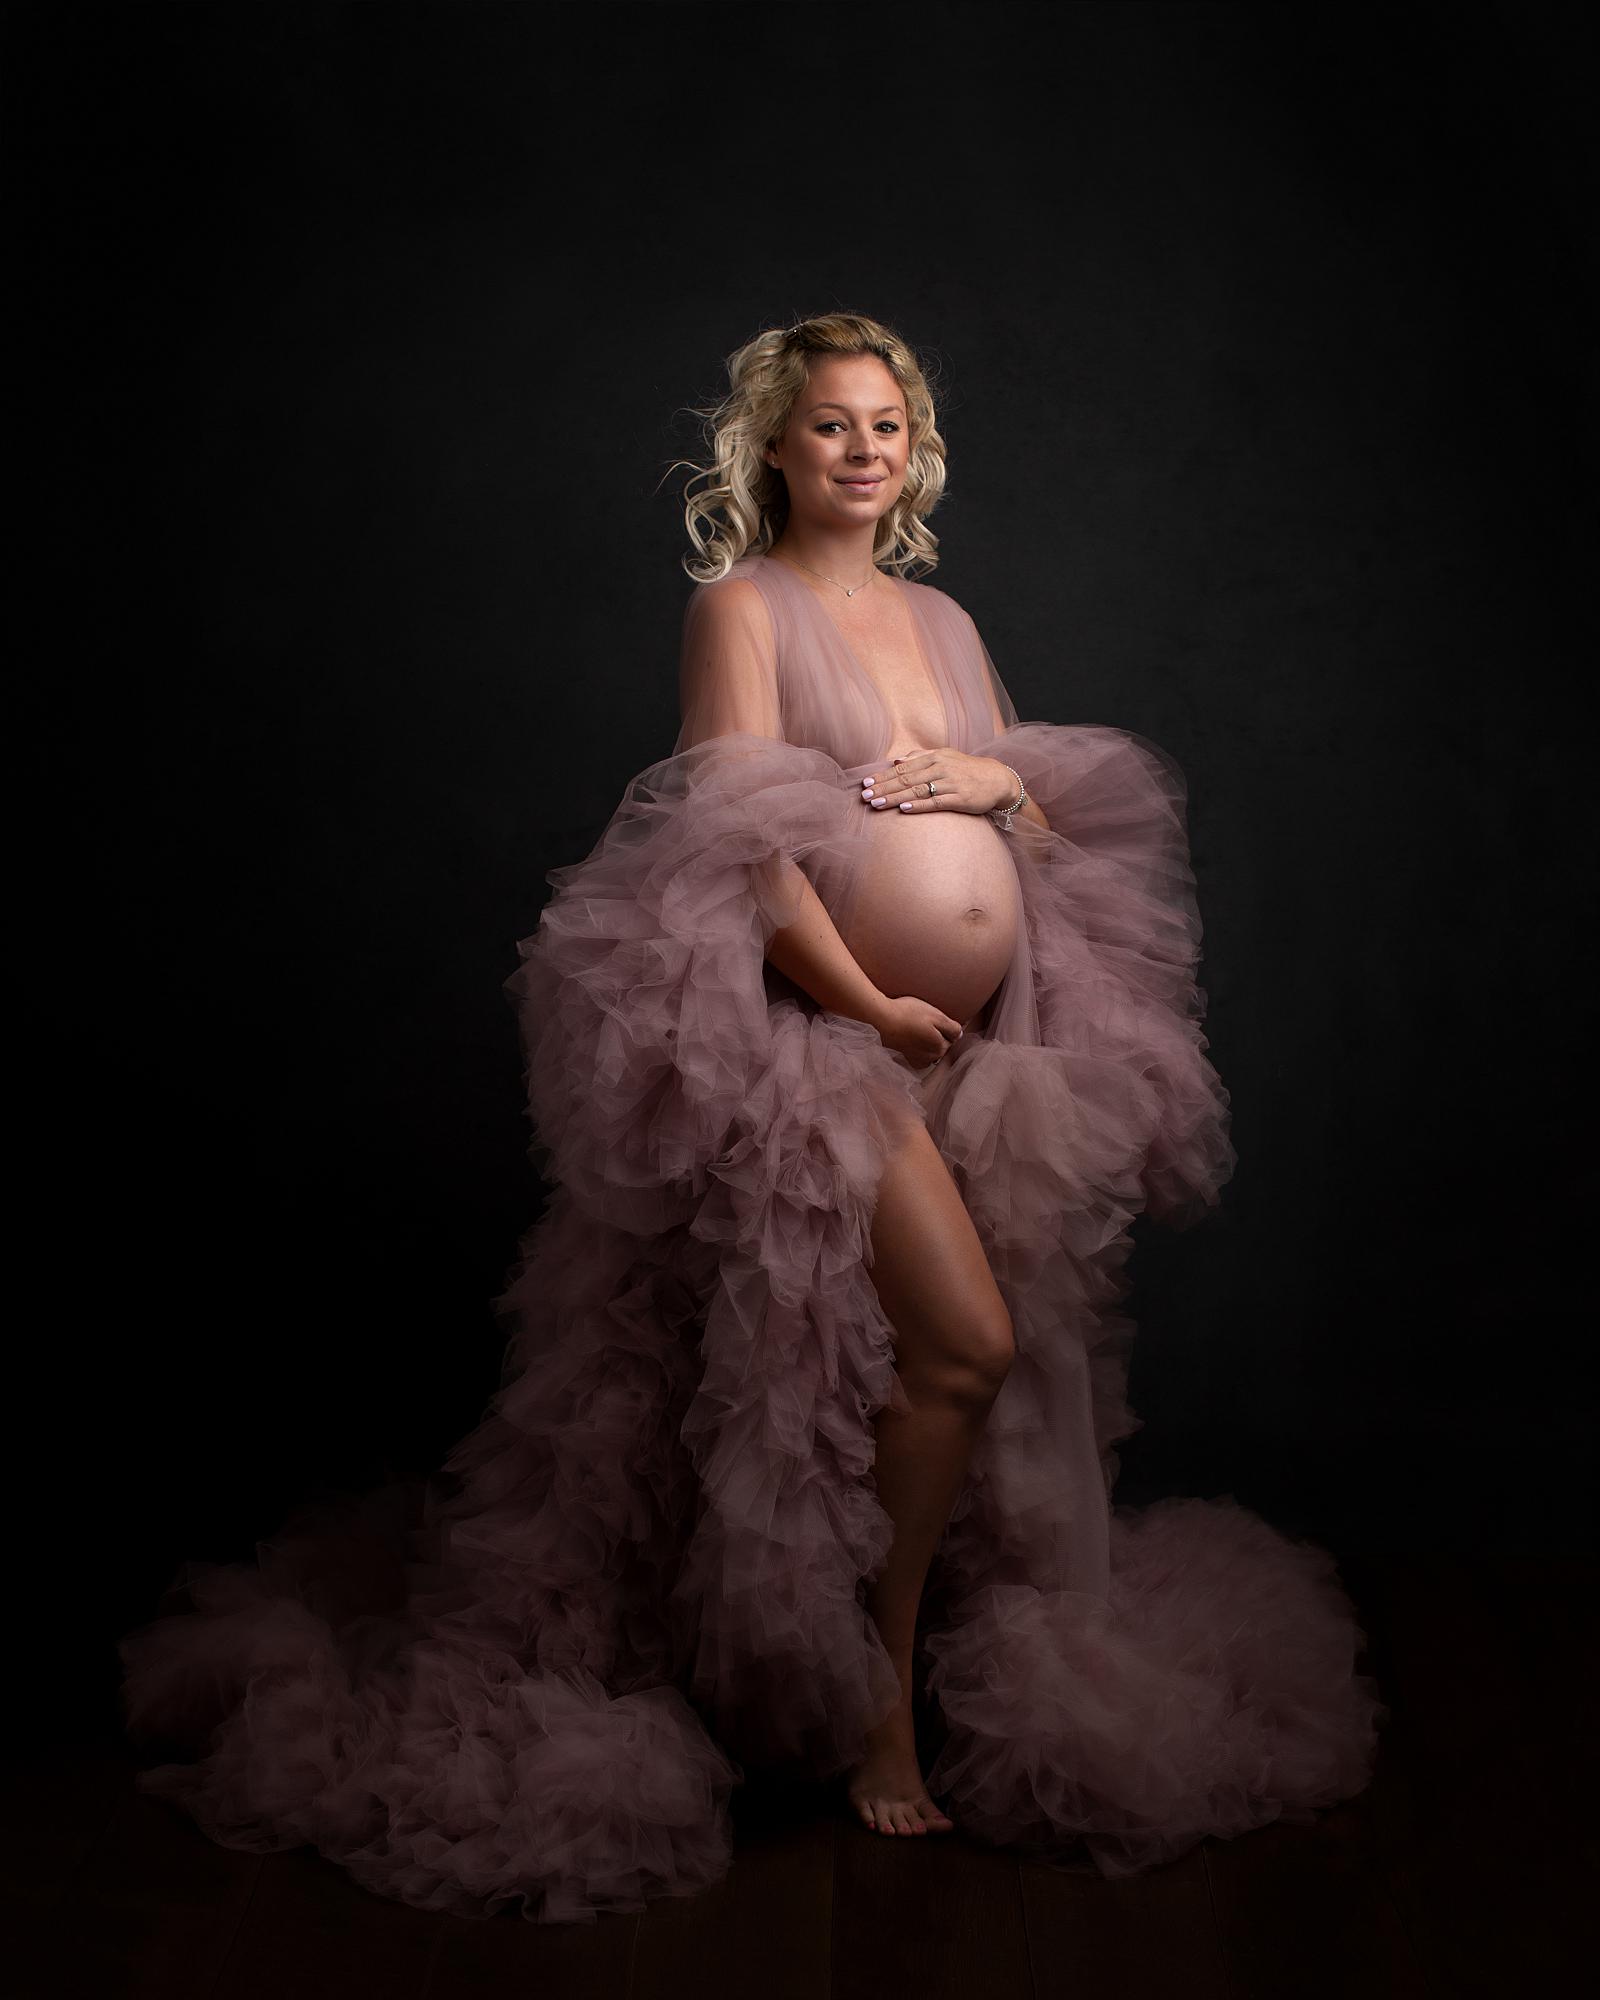 Pregnant woman posing in a sheer pink gown for a maternity photoshoot in Alison McKenny's Suffolk studio